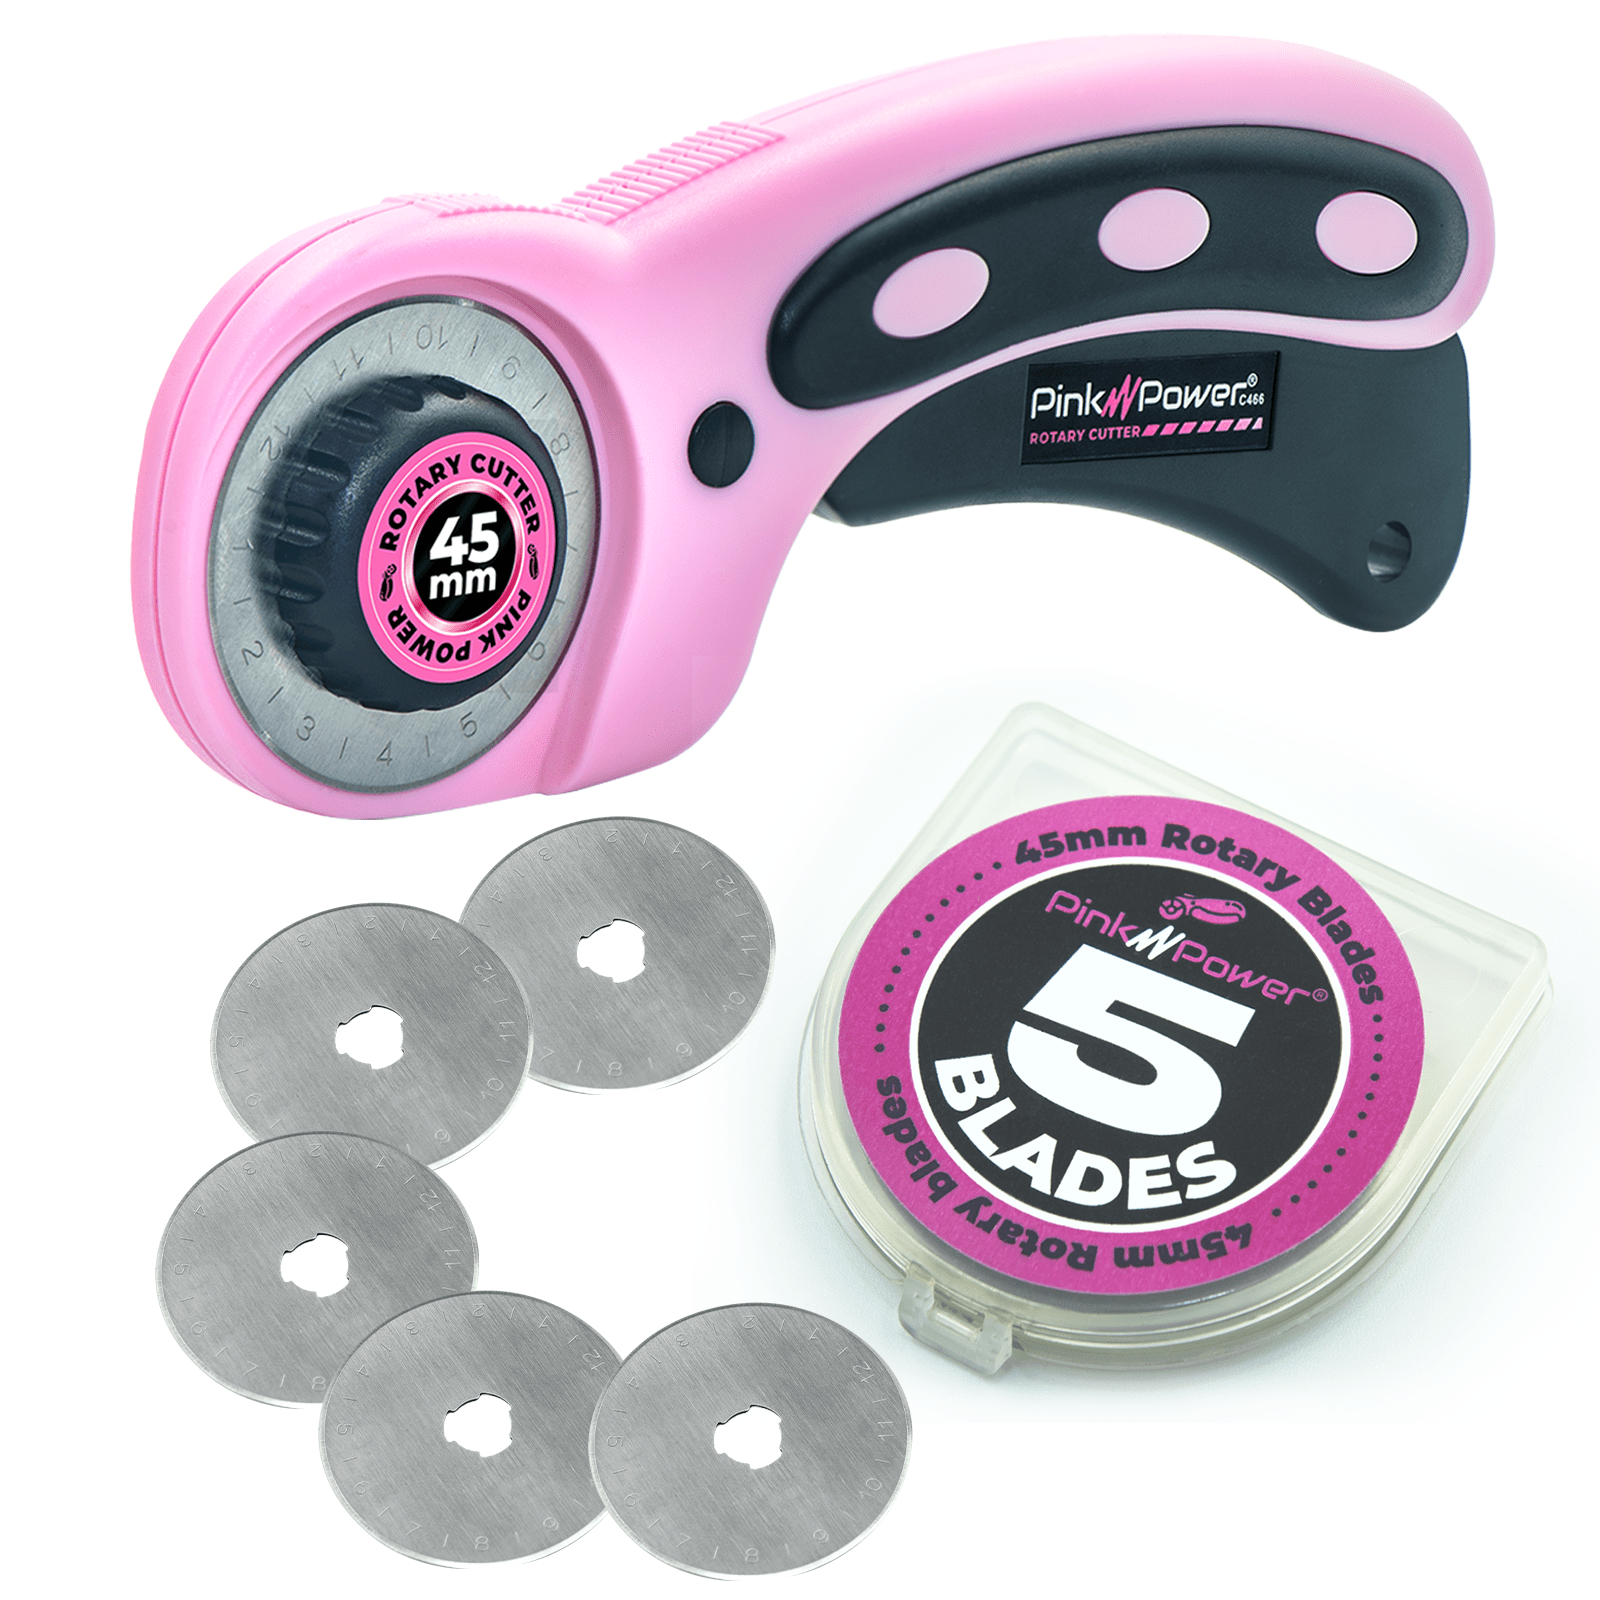 45mm MANUAL ROTARY CUTTER w/ 5-Pack BLADES SET Pink Power 